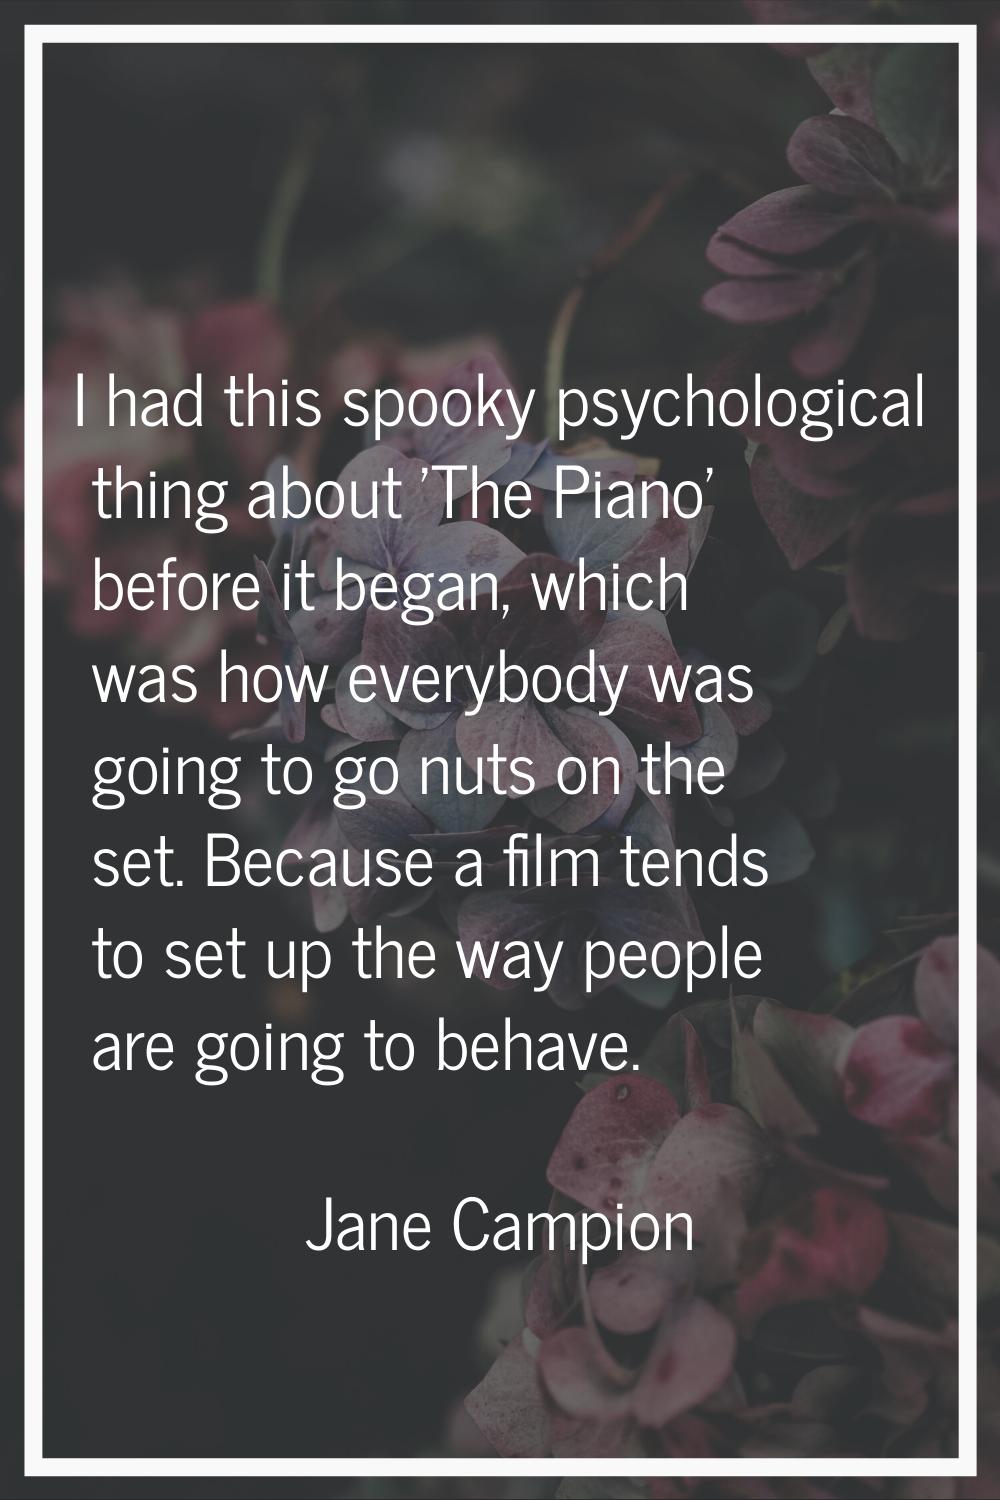 I had this spooky psychological thing about 'The Piano' before it began, which was how everybody wa